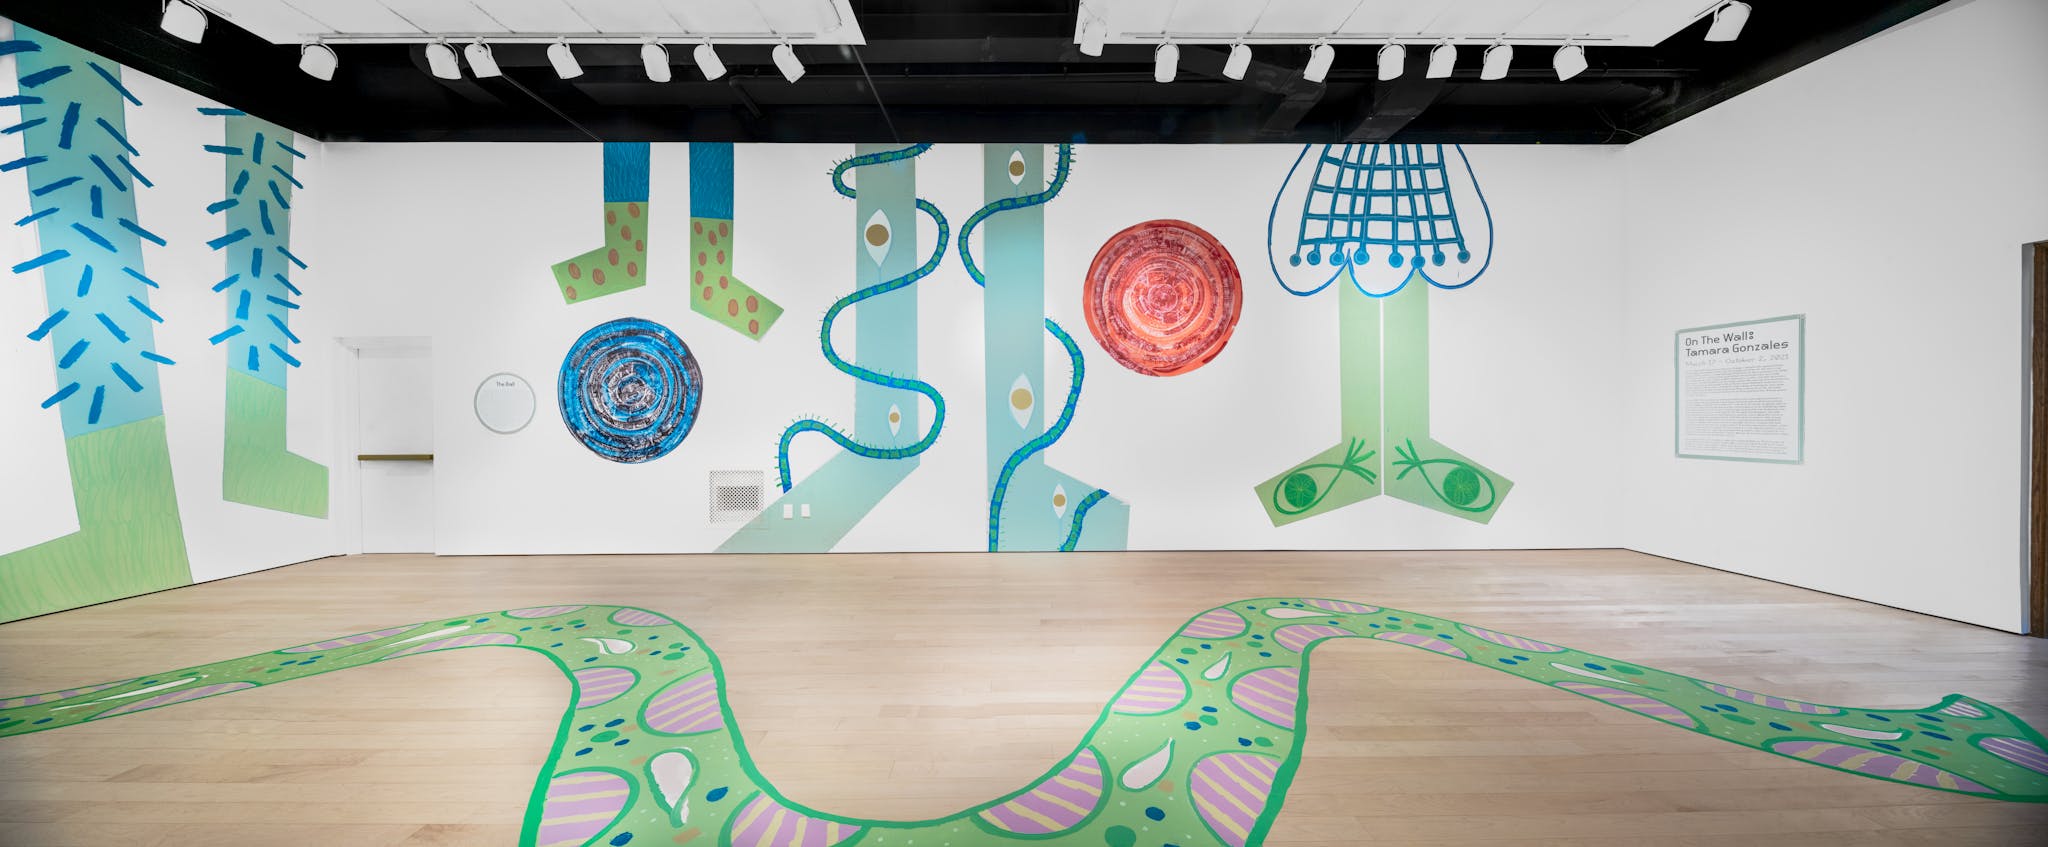 Whimsical green and blue paintings by Tamara Gonzales cover the floor and walls of the gallery space.